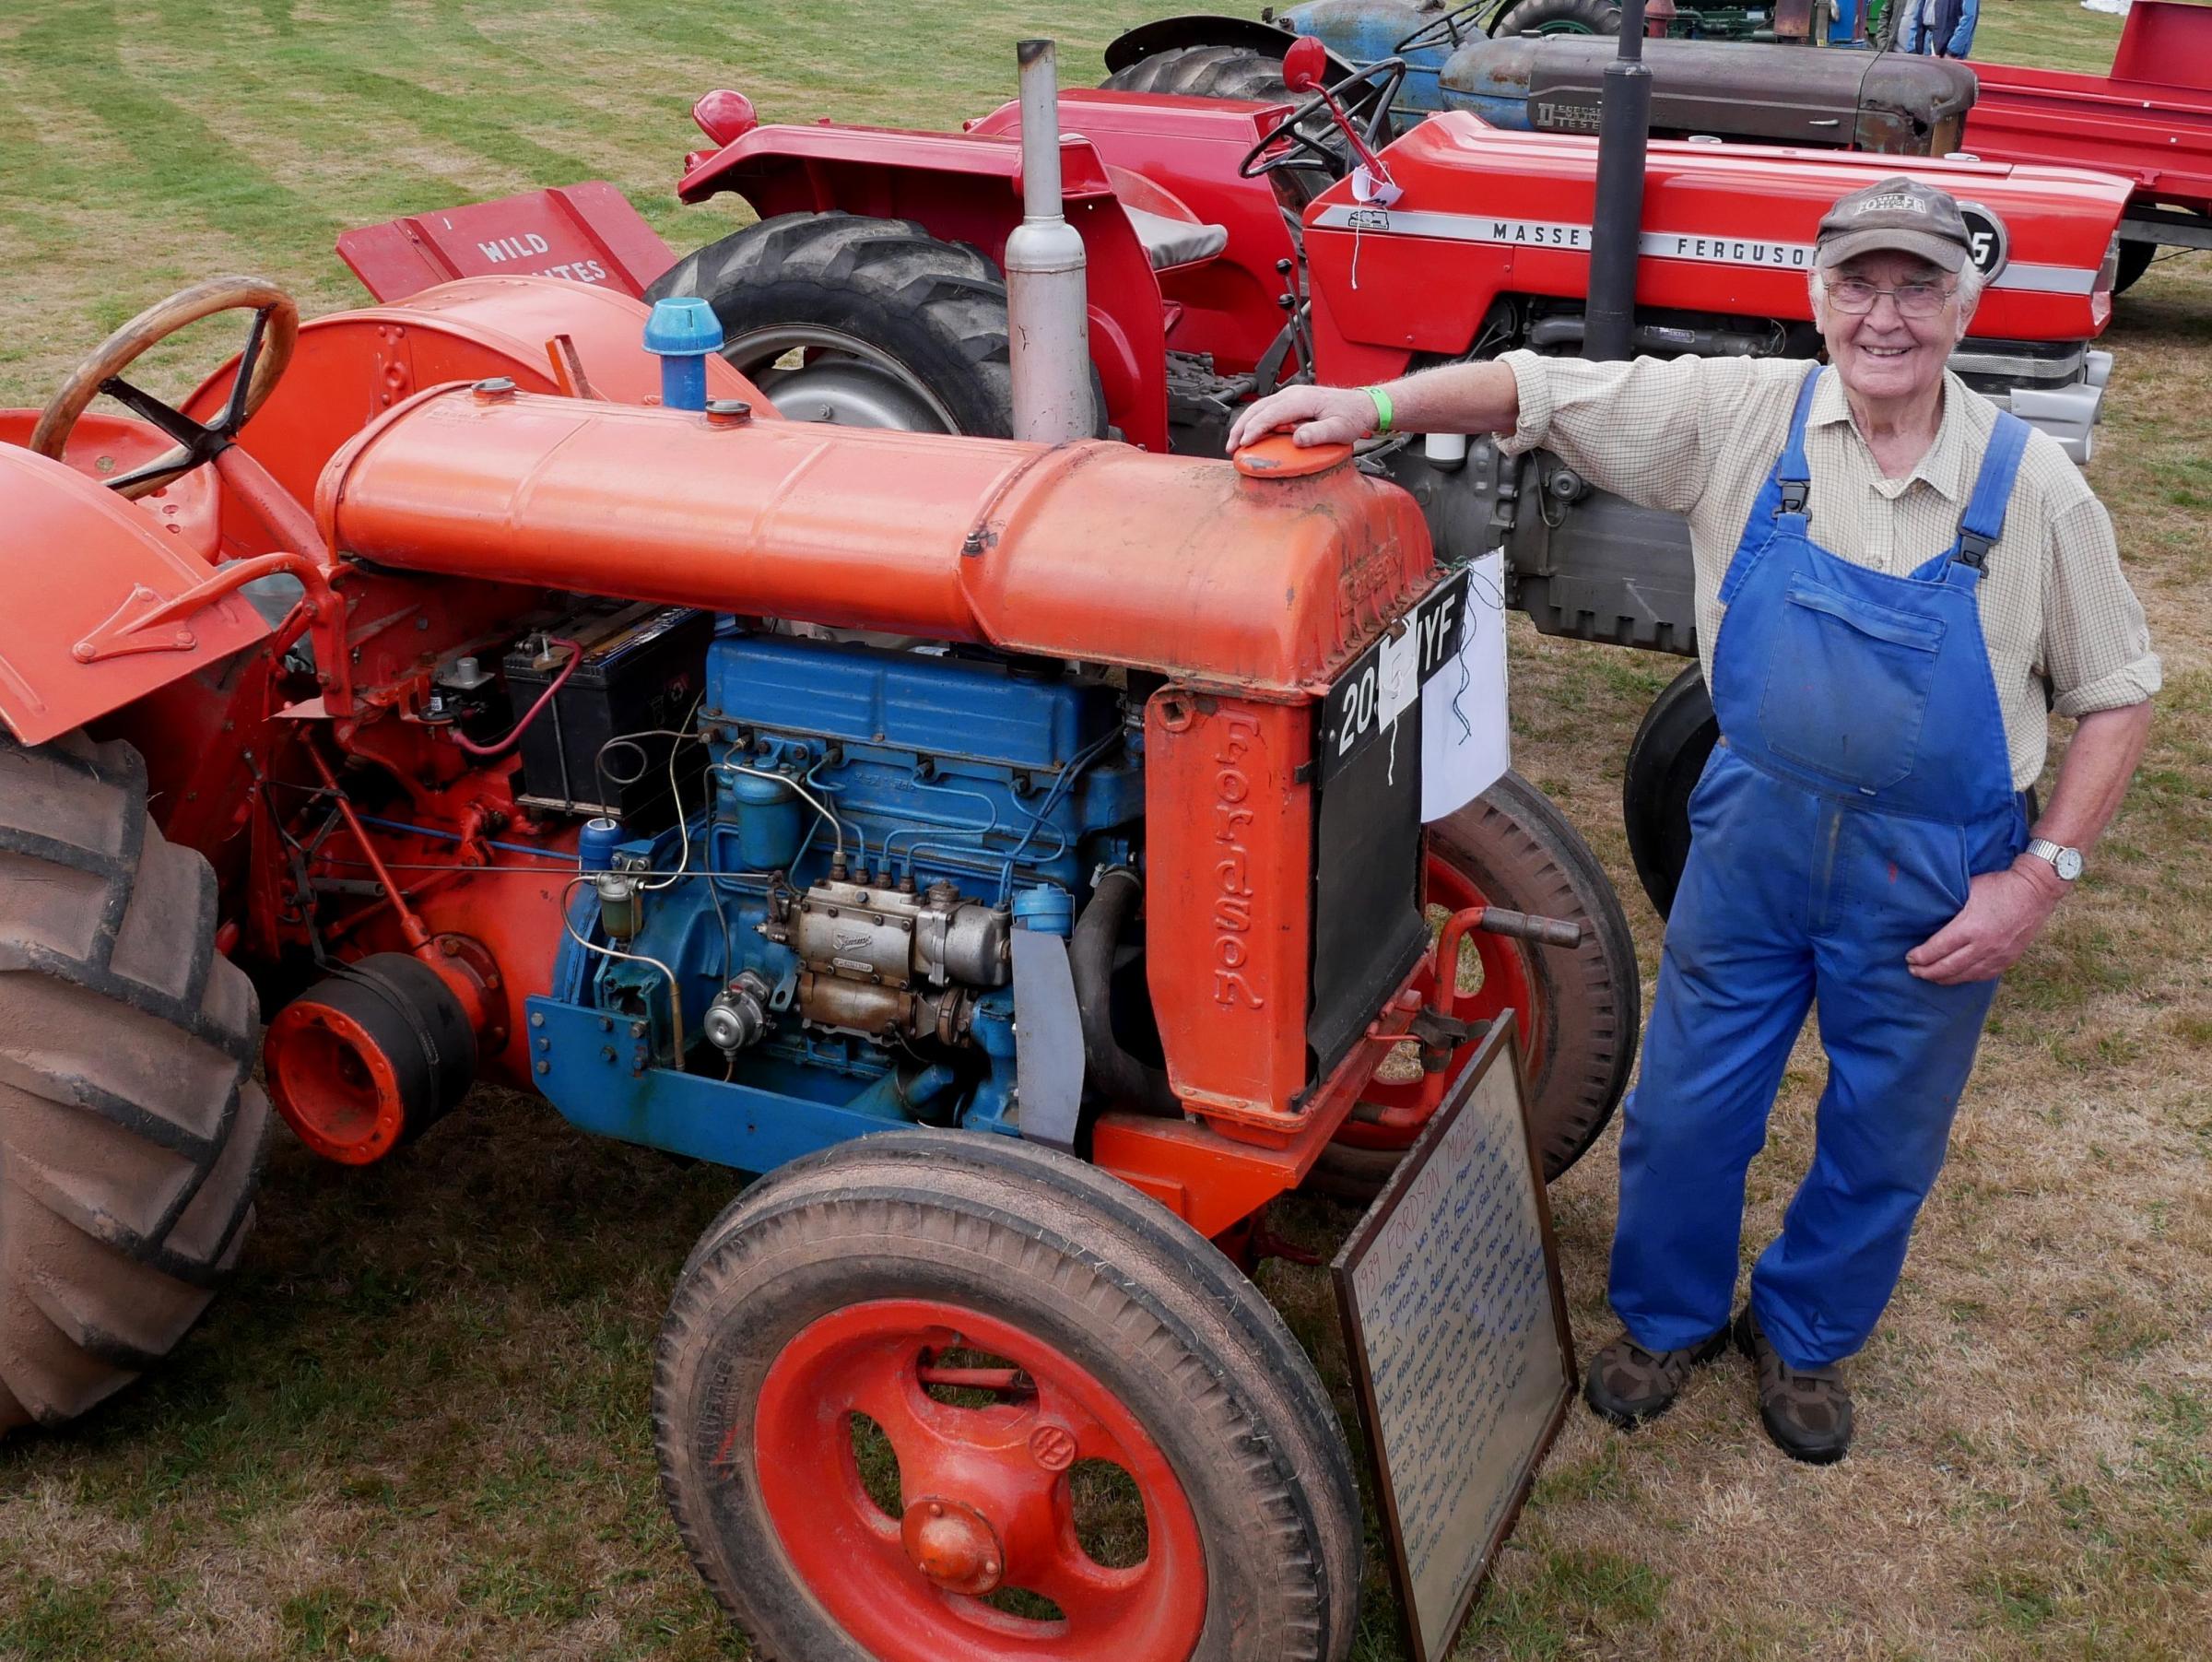 Barry Evans from Kington with his Fordson Model N 1939 vintage tractor. 